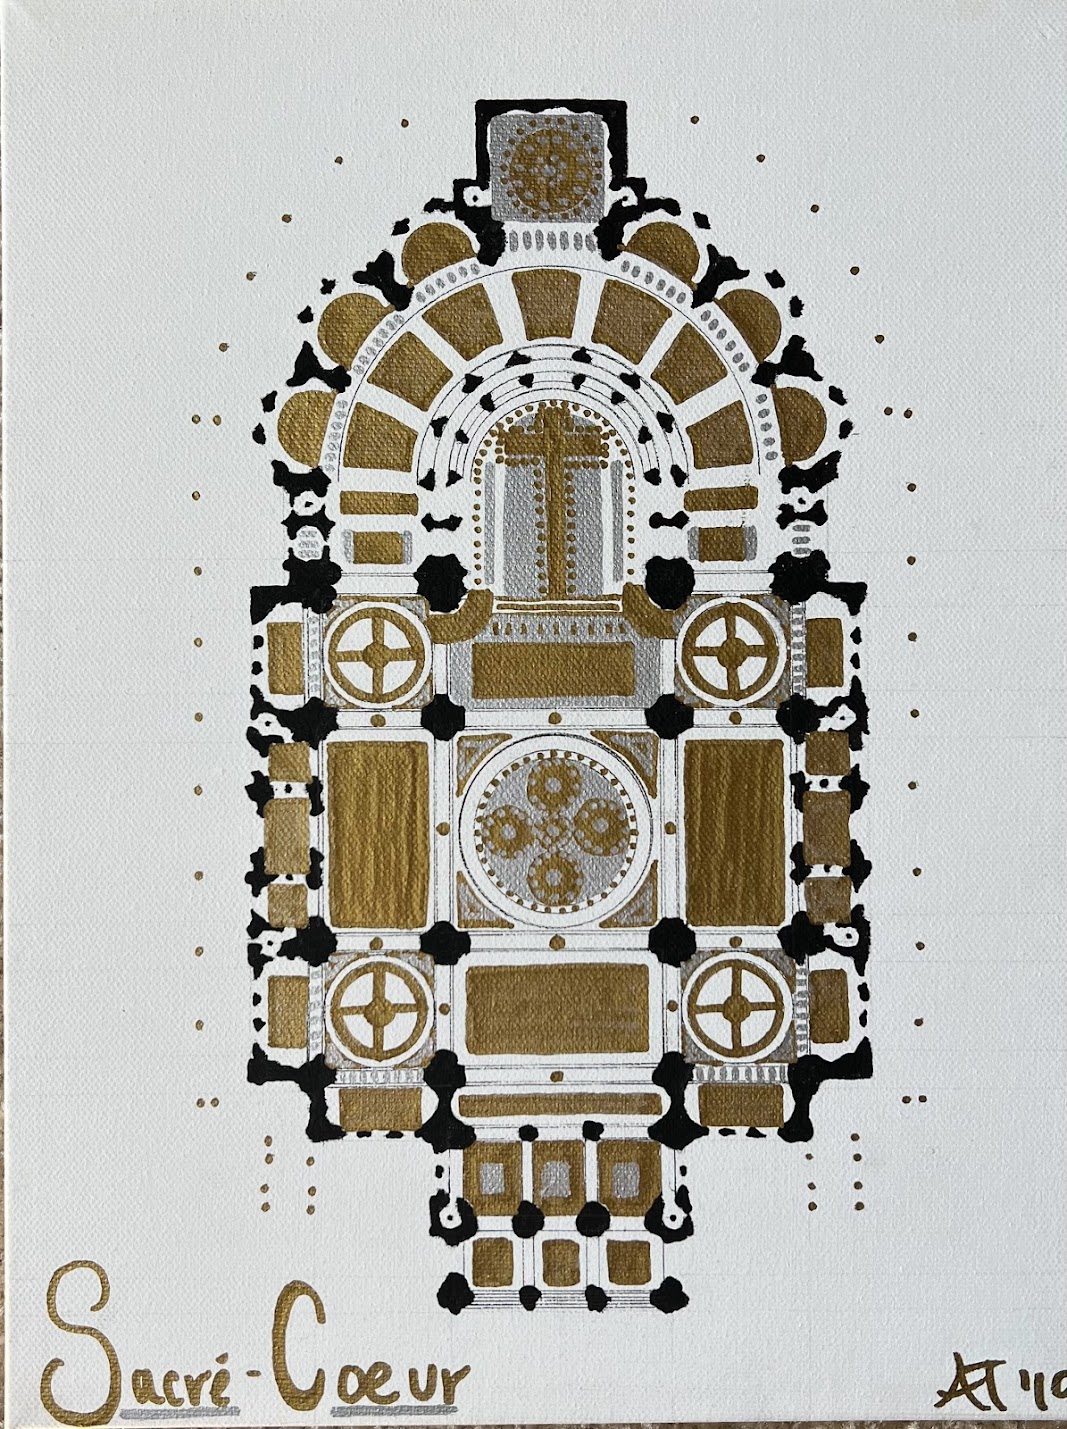 A floor plan diagram of Sacre Coeur church in France. It is done in a mix of gold, silver and black outlining the architectural symmetry of the famous building. Along the bottom is is labeled "Sacre Coeur"